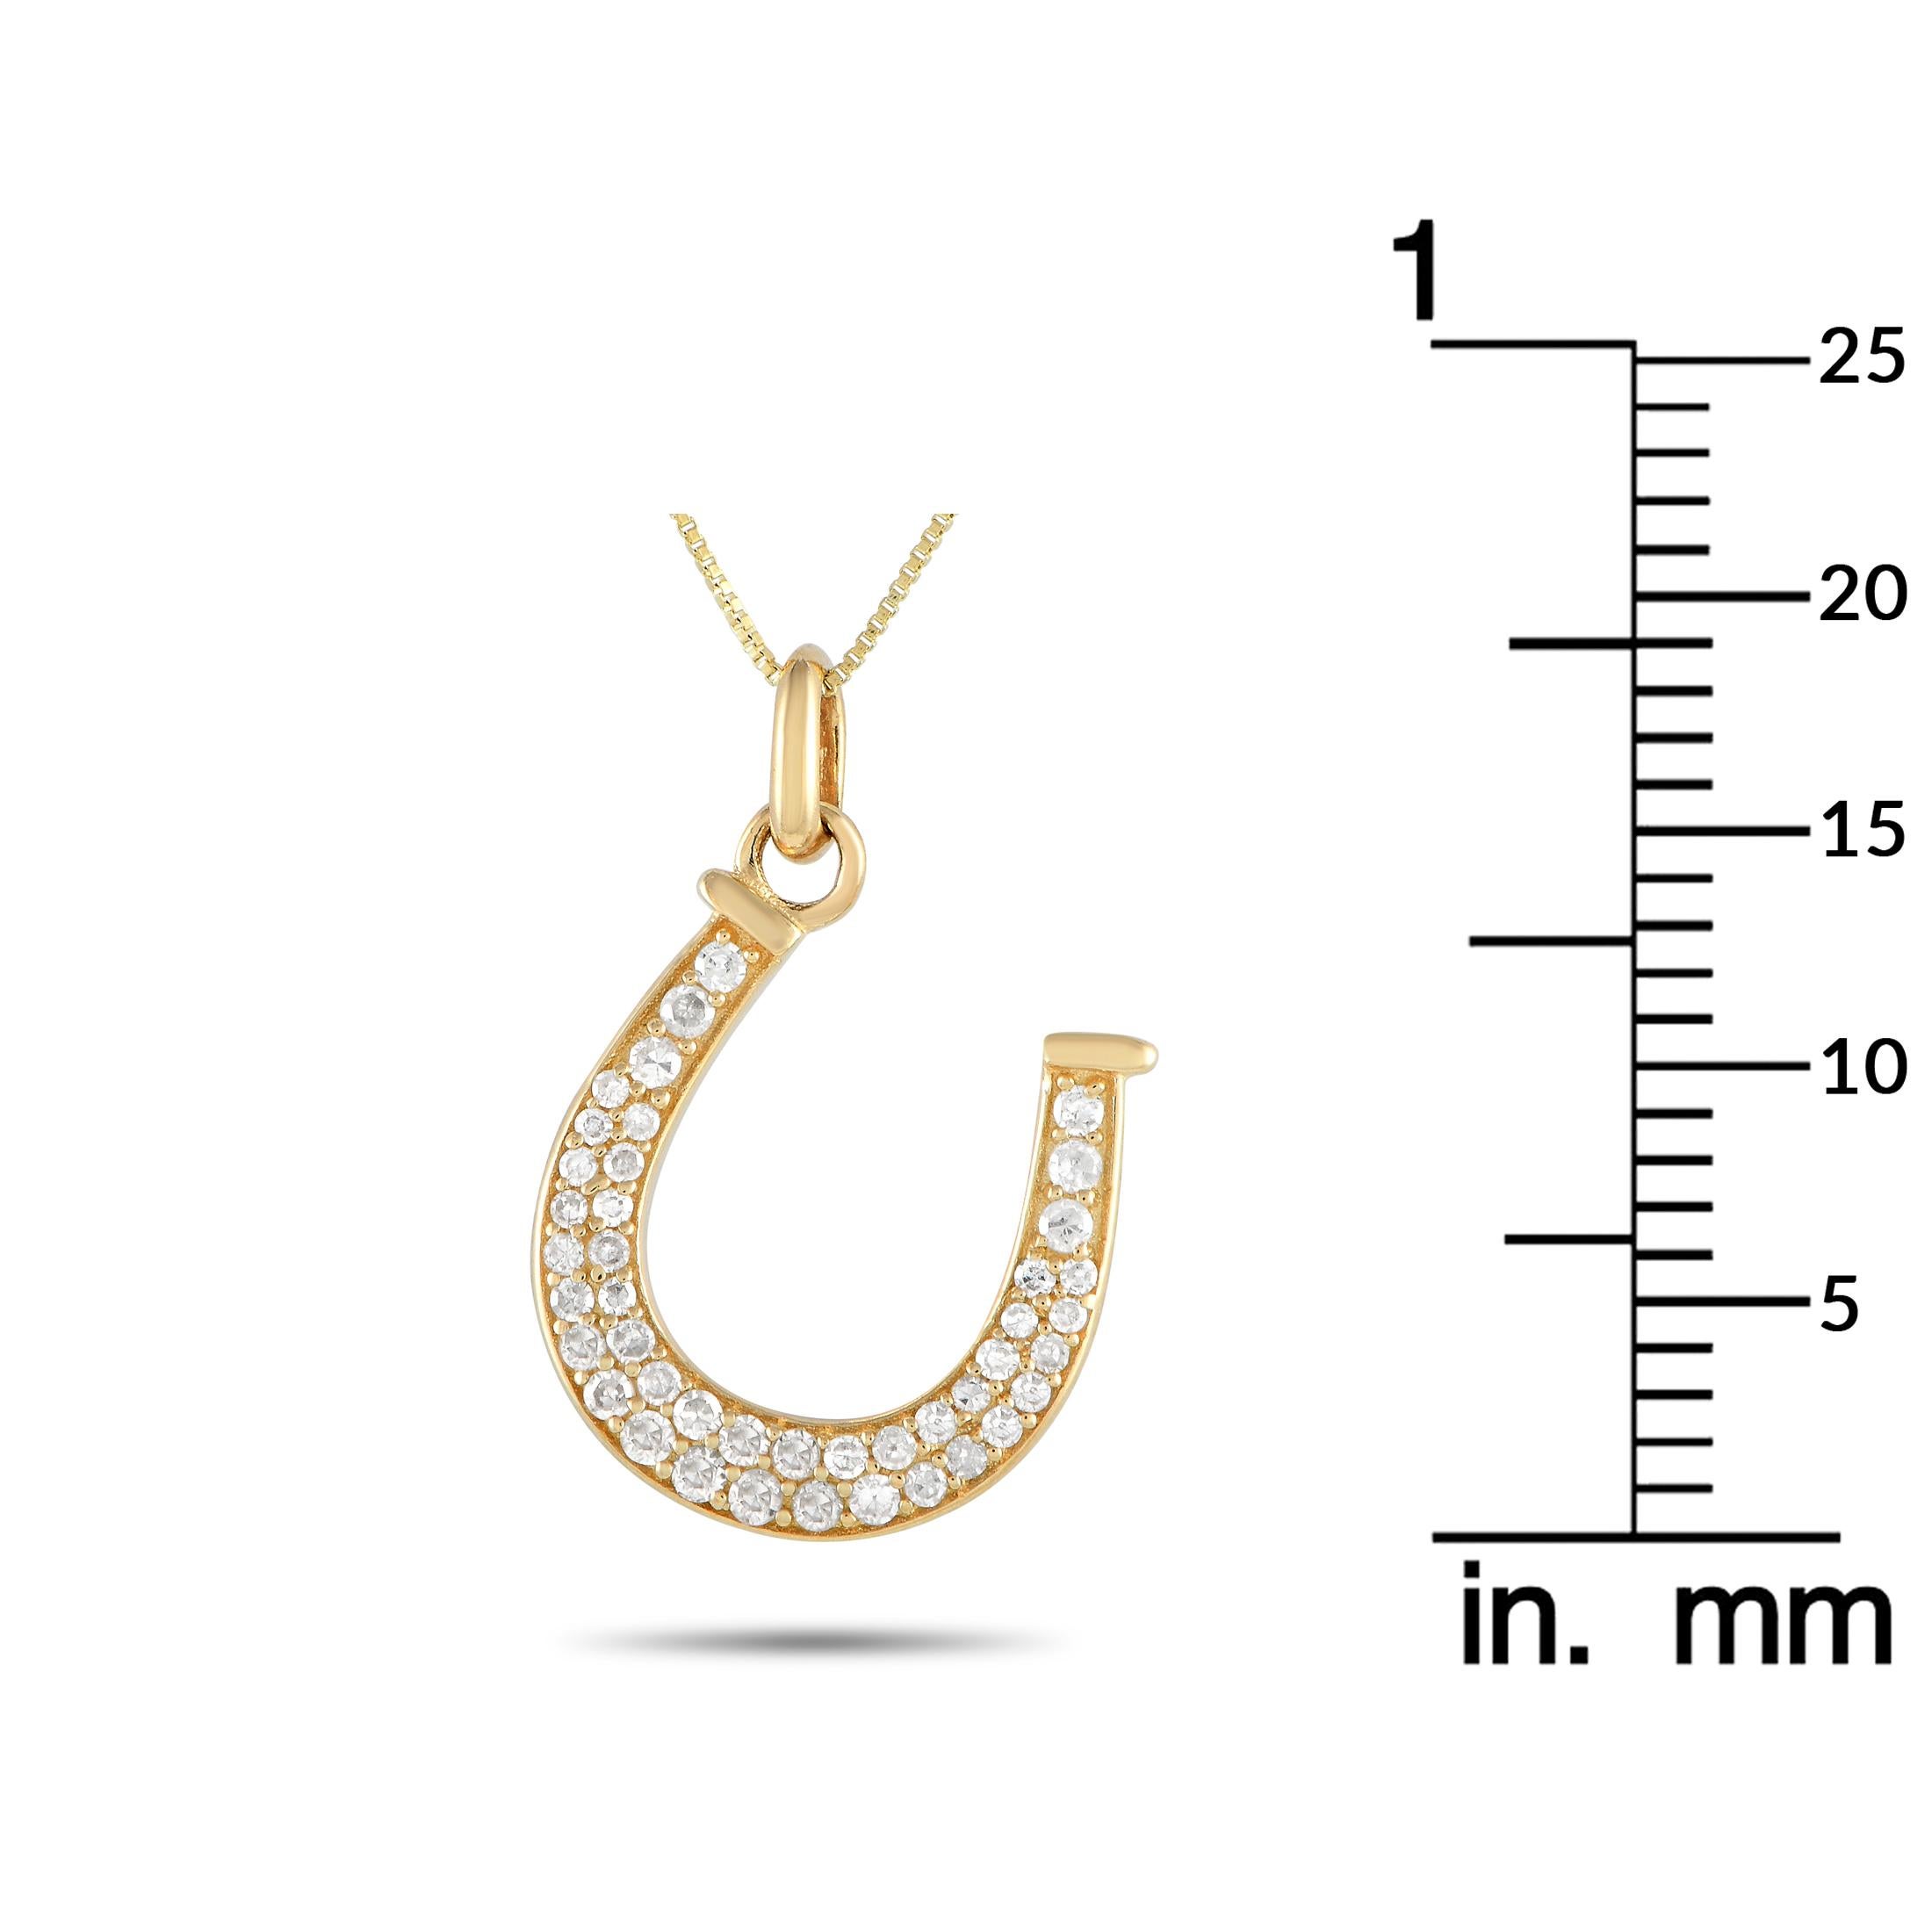 LB Exclusive 14K Yellow Gold 0.18ct Diamond Horseshoe Necklace PD4-15625Y In New Condition For Sale In Southampton, PA